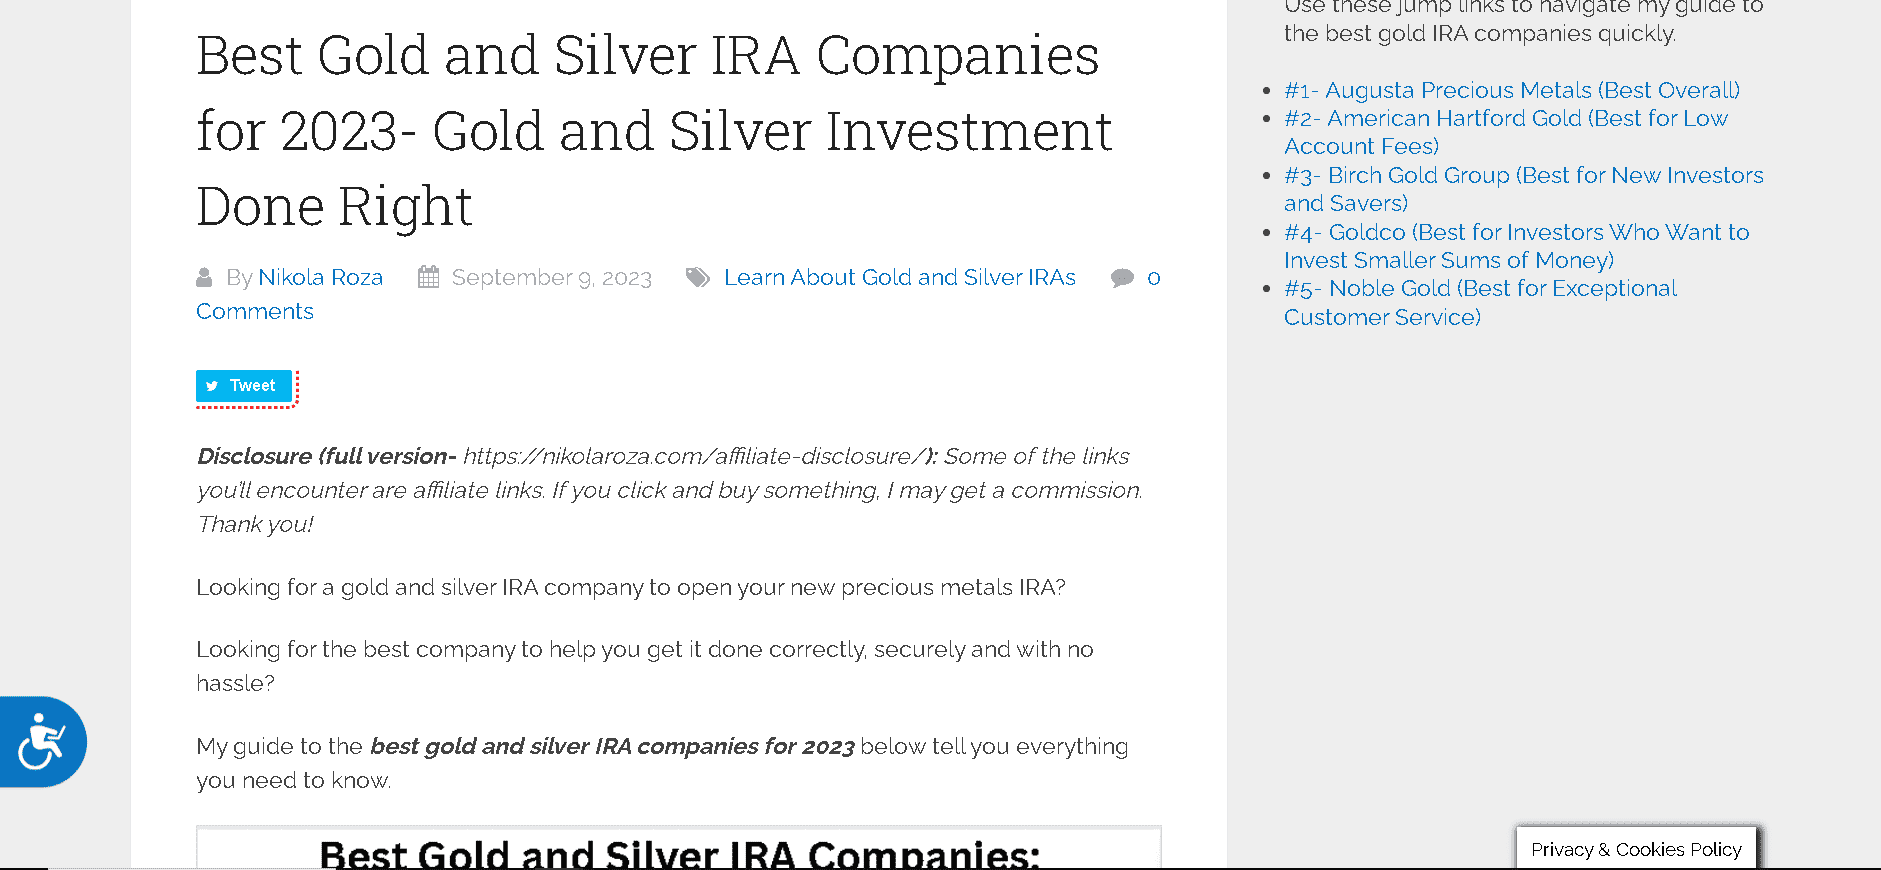 Best gold and silver IRA companies guide